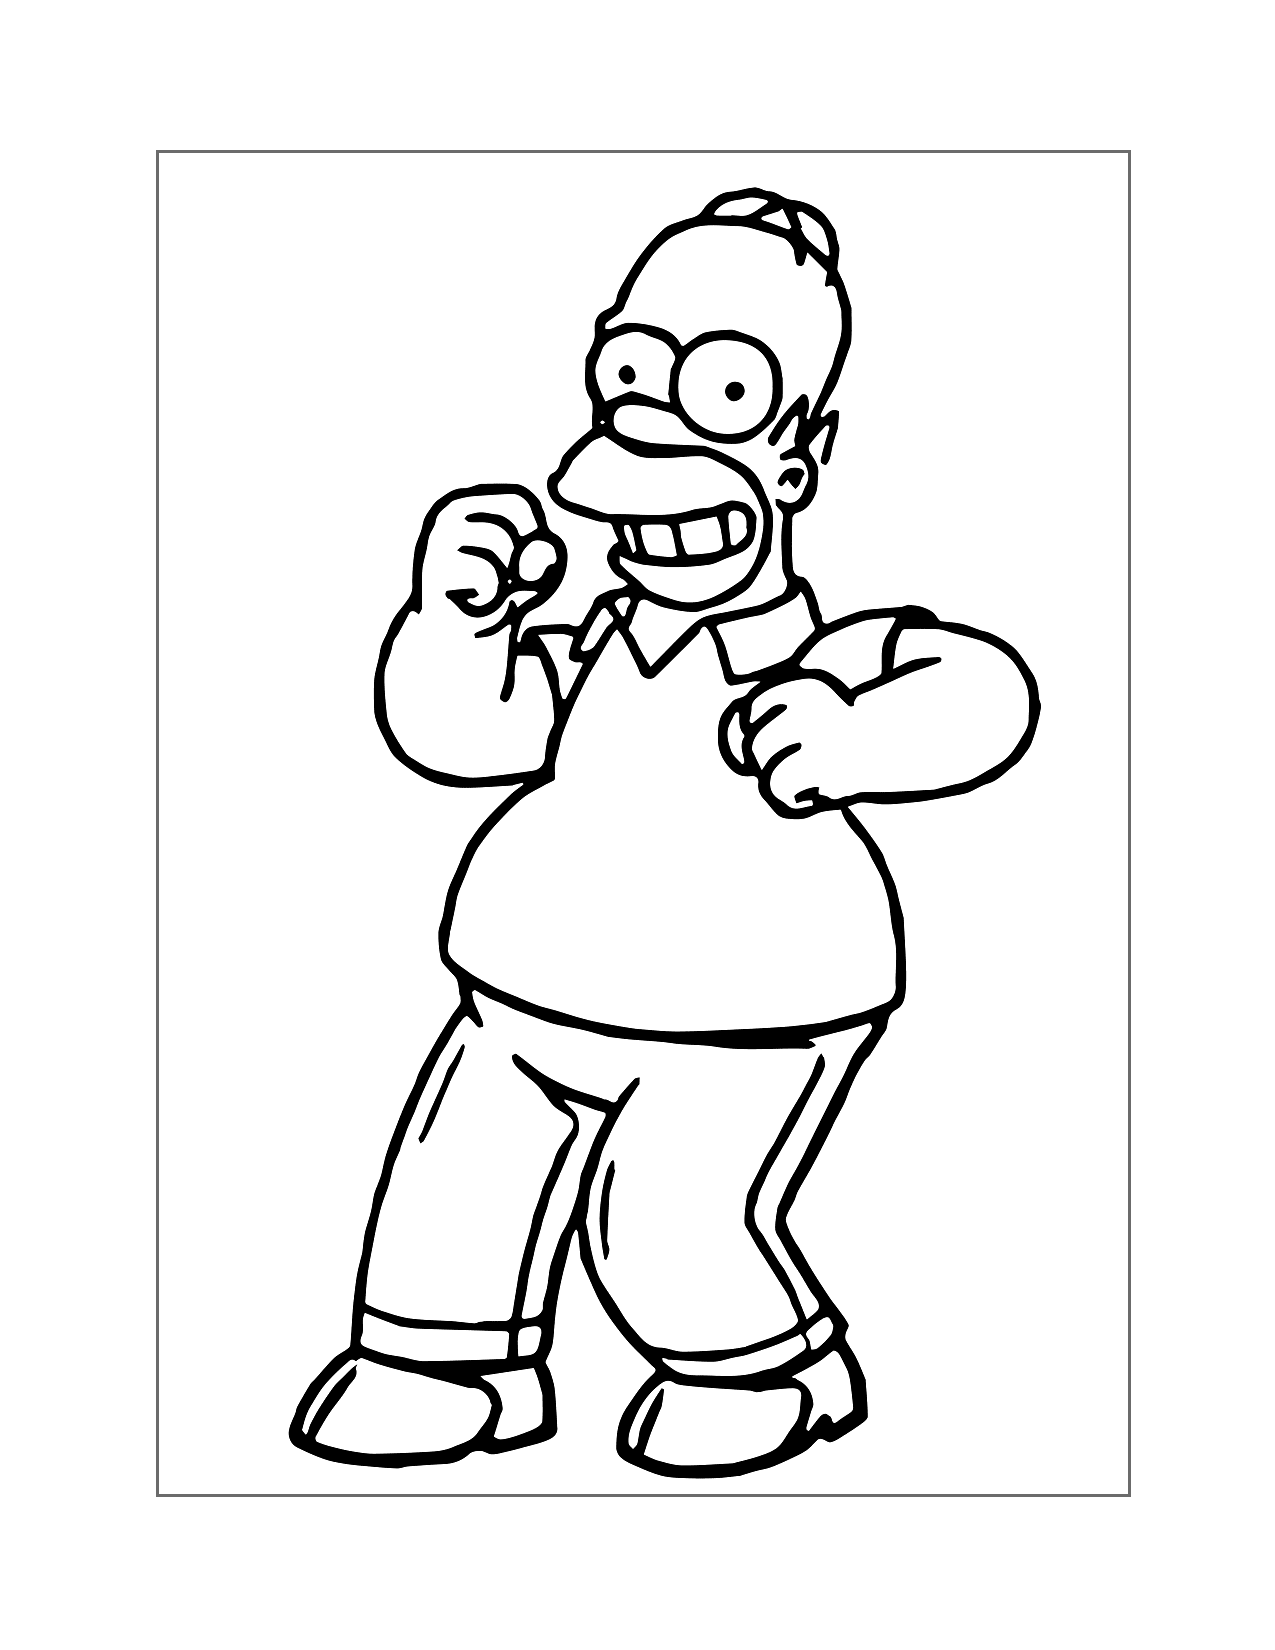 Homer Simpson Dancing Coloring Page